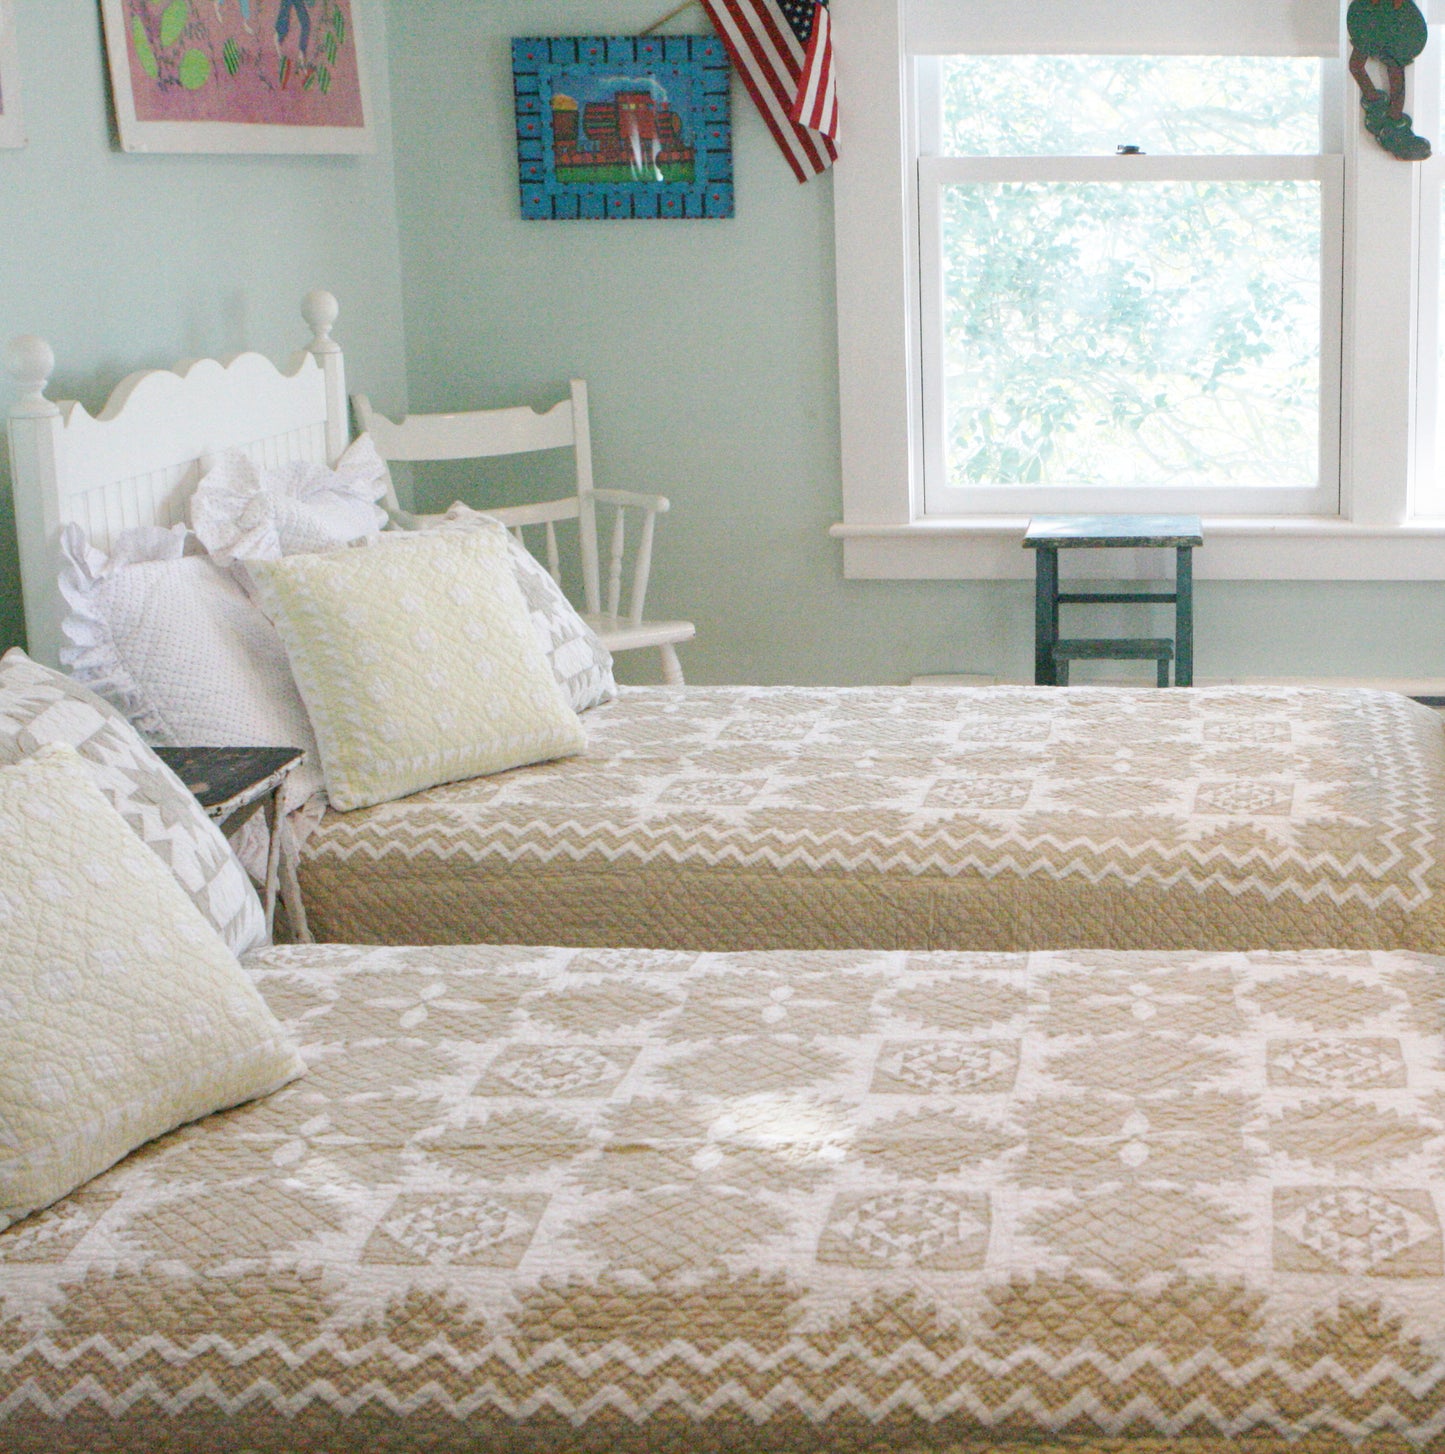 "Feathered Star" in Champagne-White Twin Quilt 64" x 85"